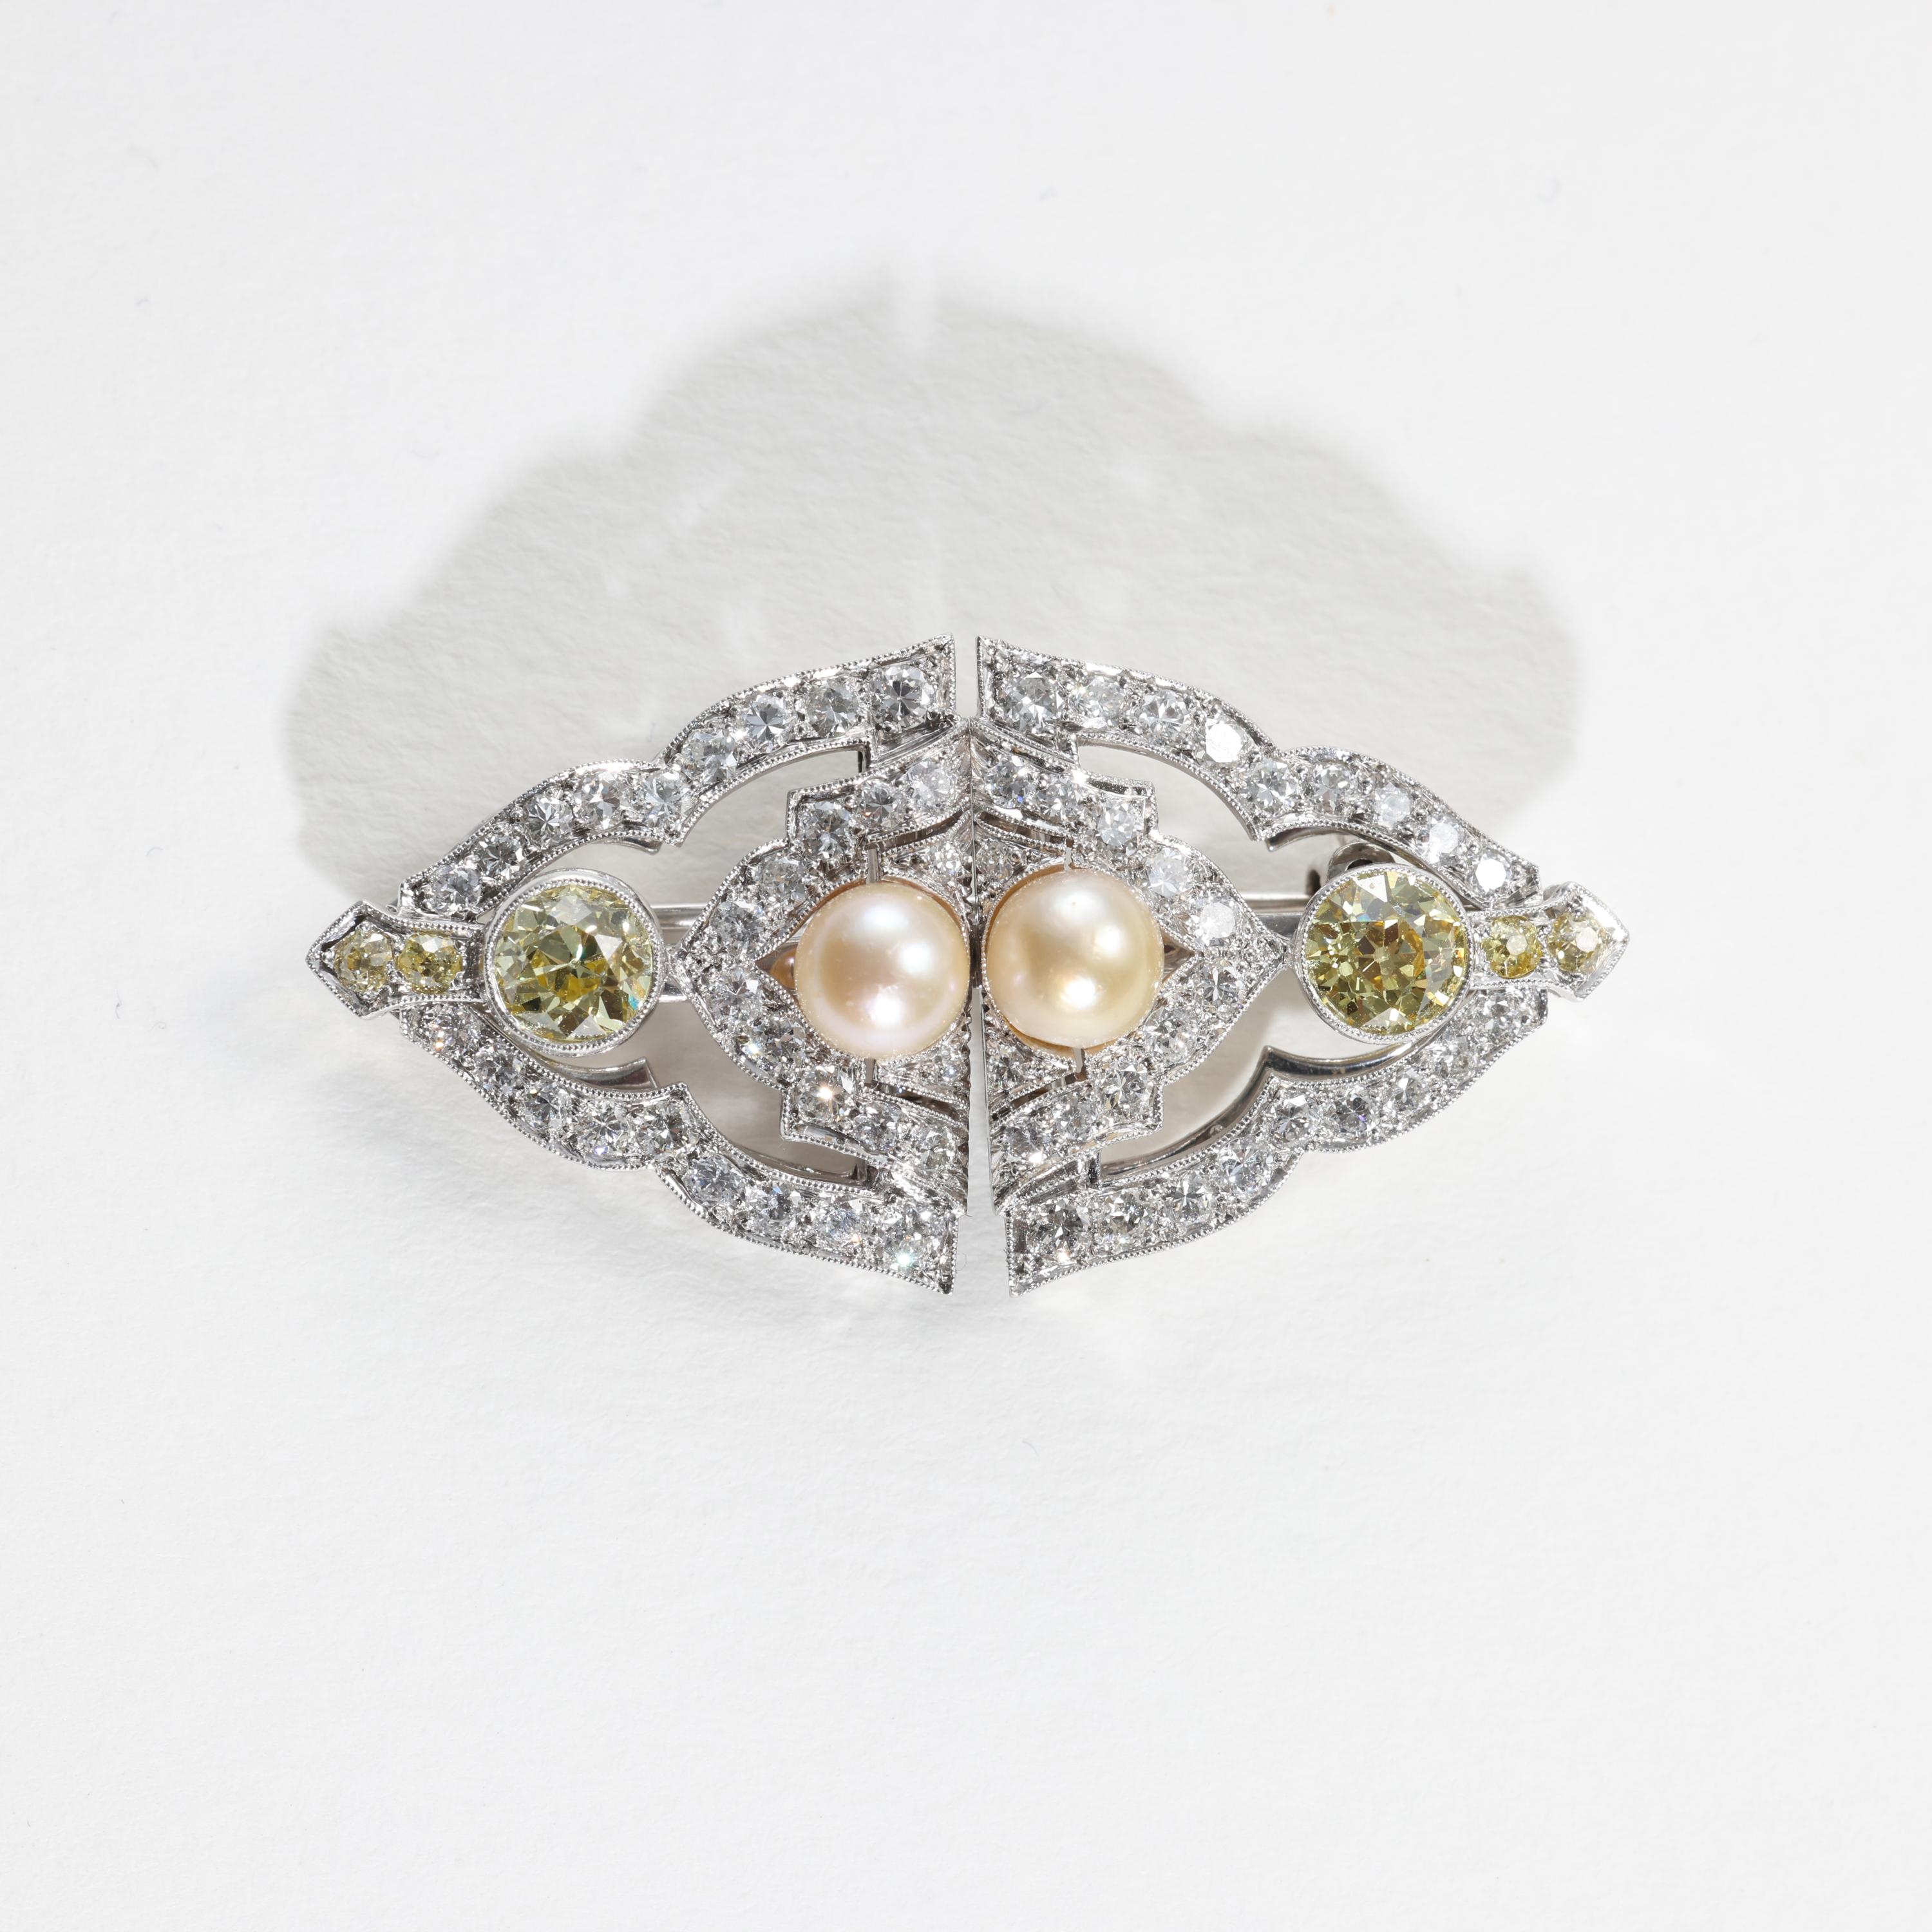 Dog Collar, Brooch: Art Deco Yellow Diamonds & Natural Pearls, Platinum, GIA For Sale 9